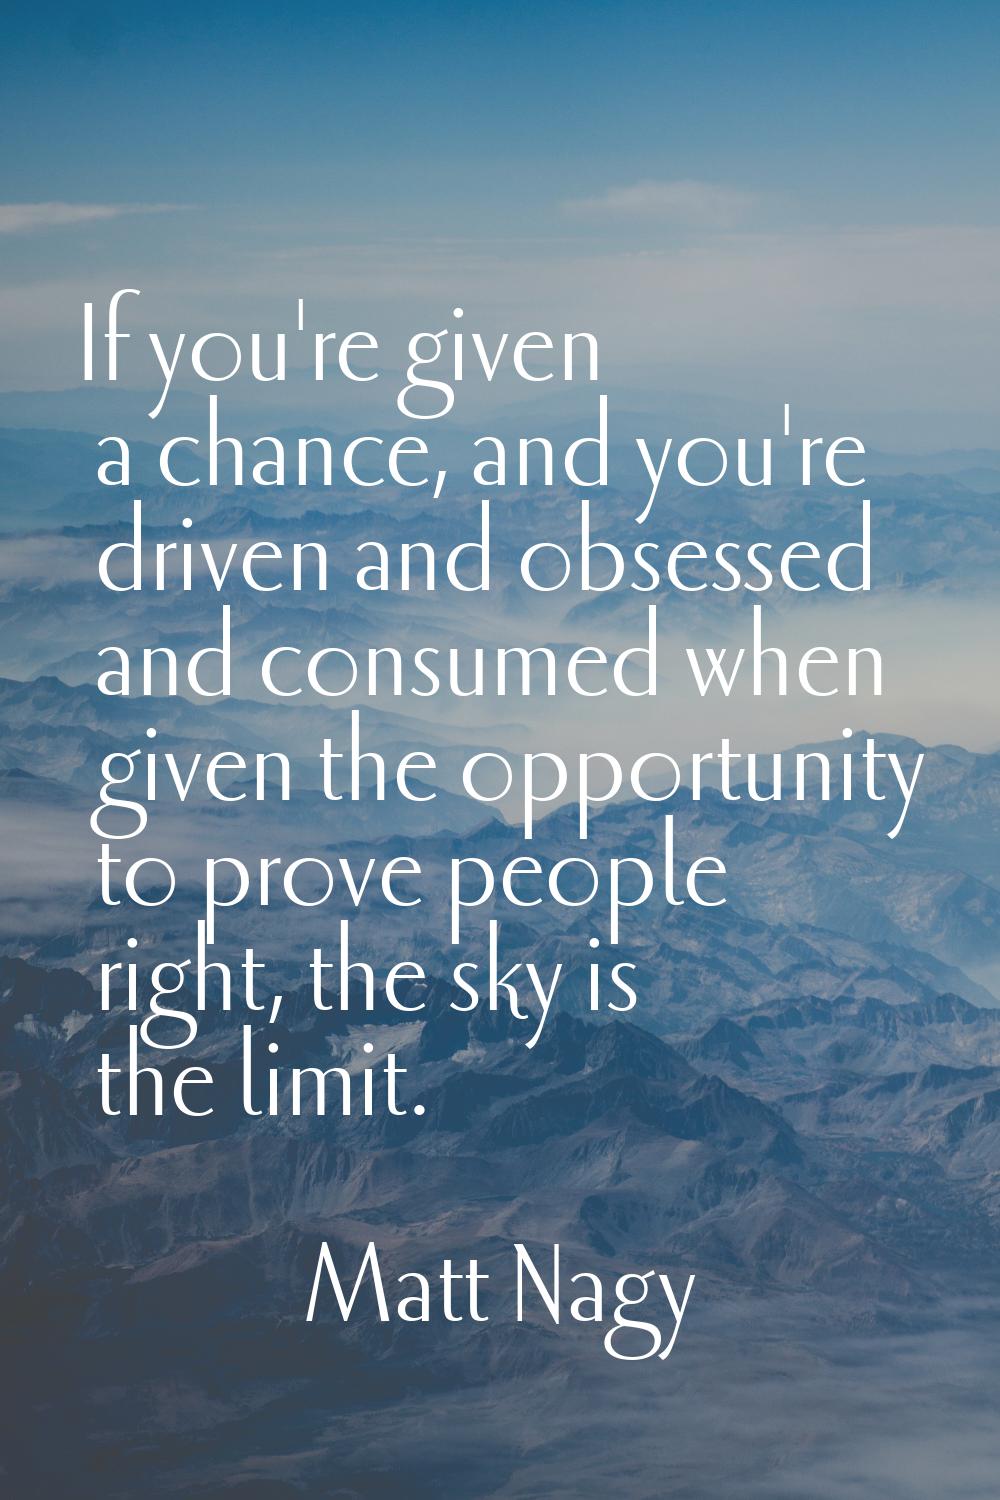 If you're given a chance, and you're driven and obsessed and consumed when given the opportunity to